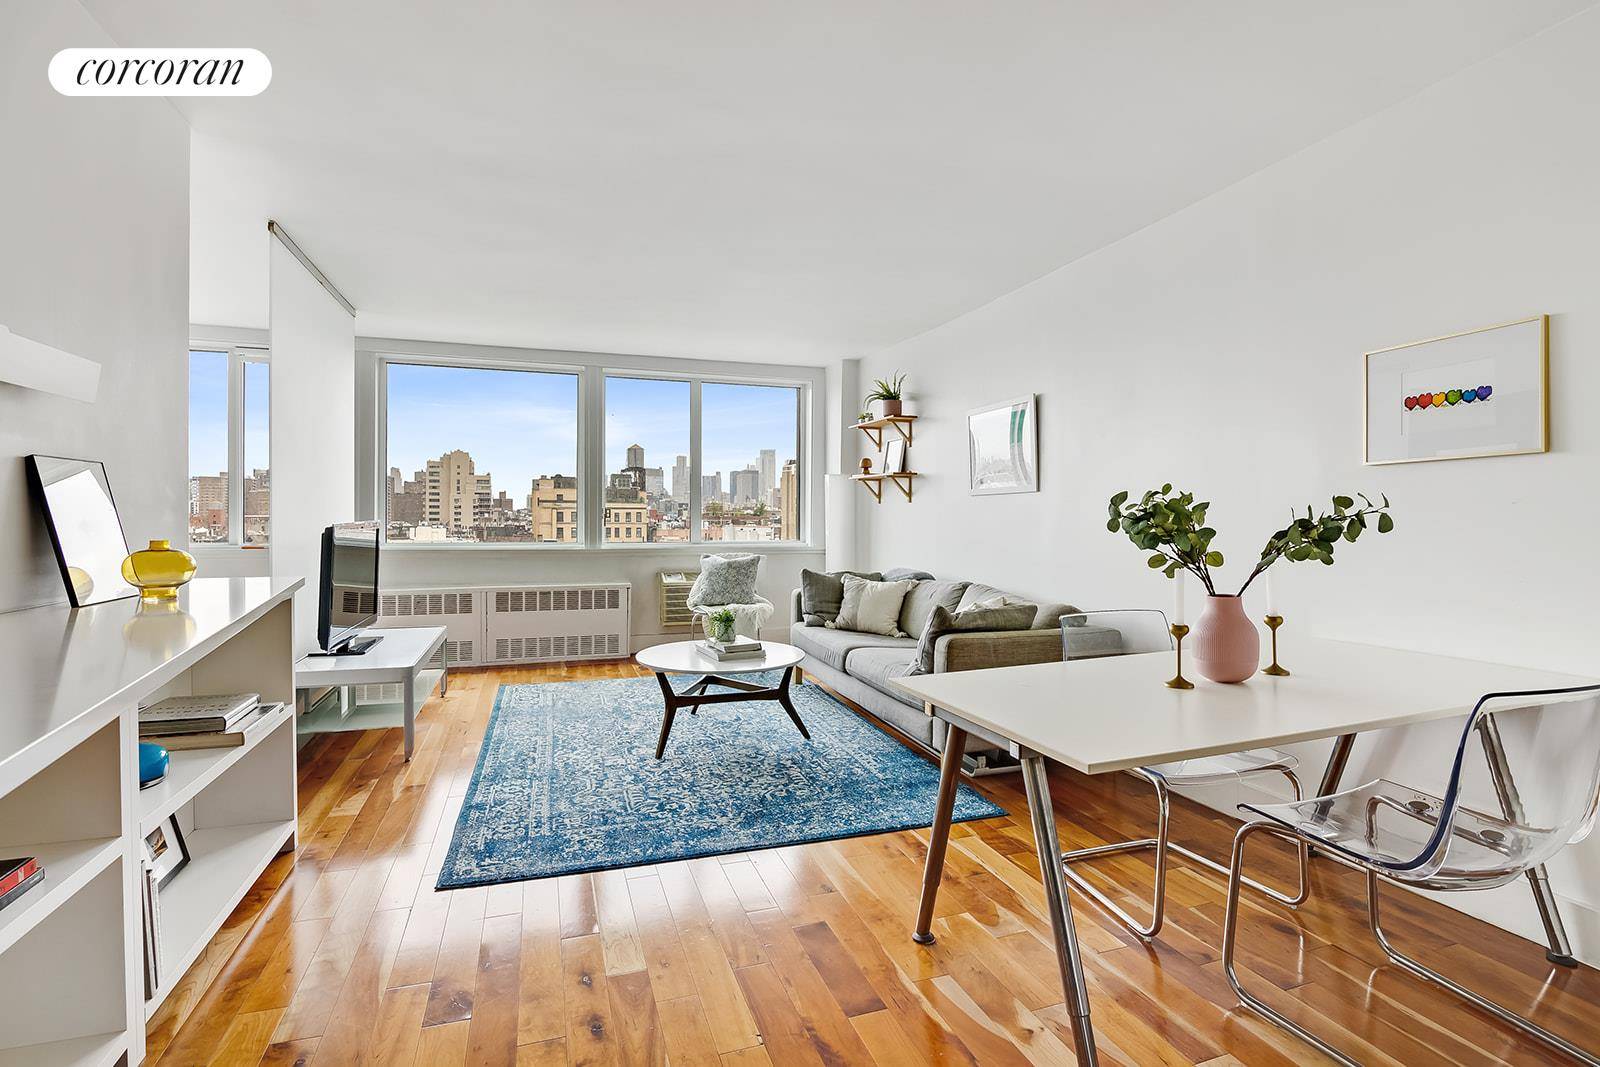 Mint condition and tastefully renovated alcove studio with spectacular southern views of Downtown Manhattan.